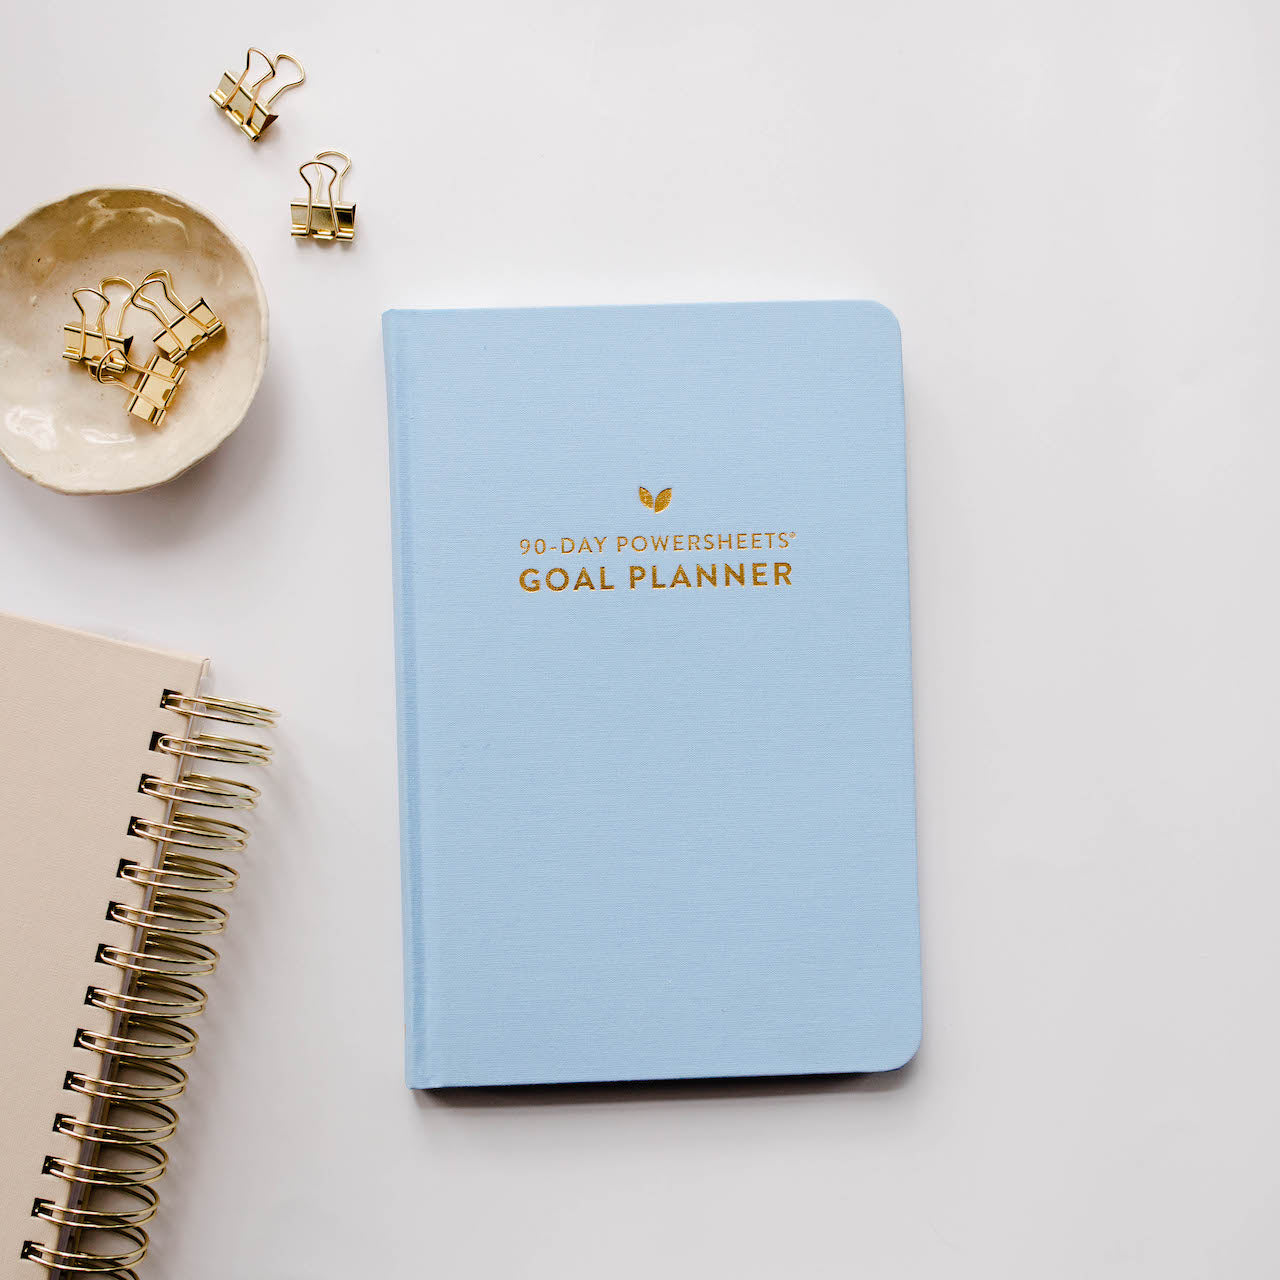 90-Day PowerSheets® Goal Planner